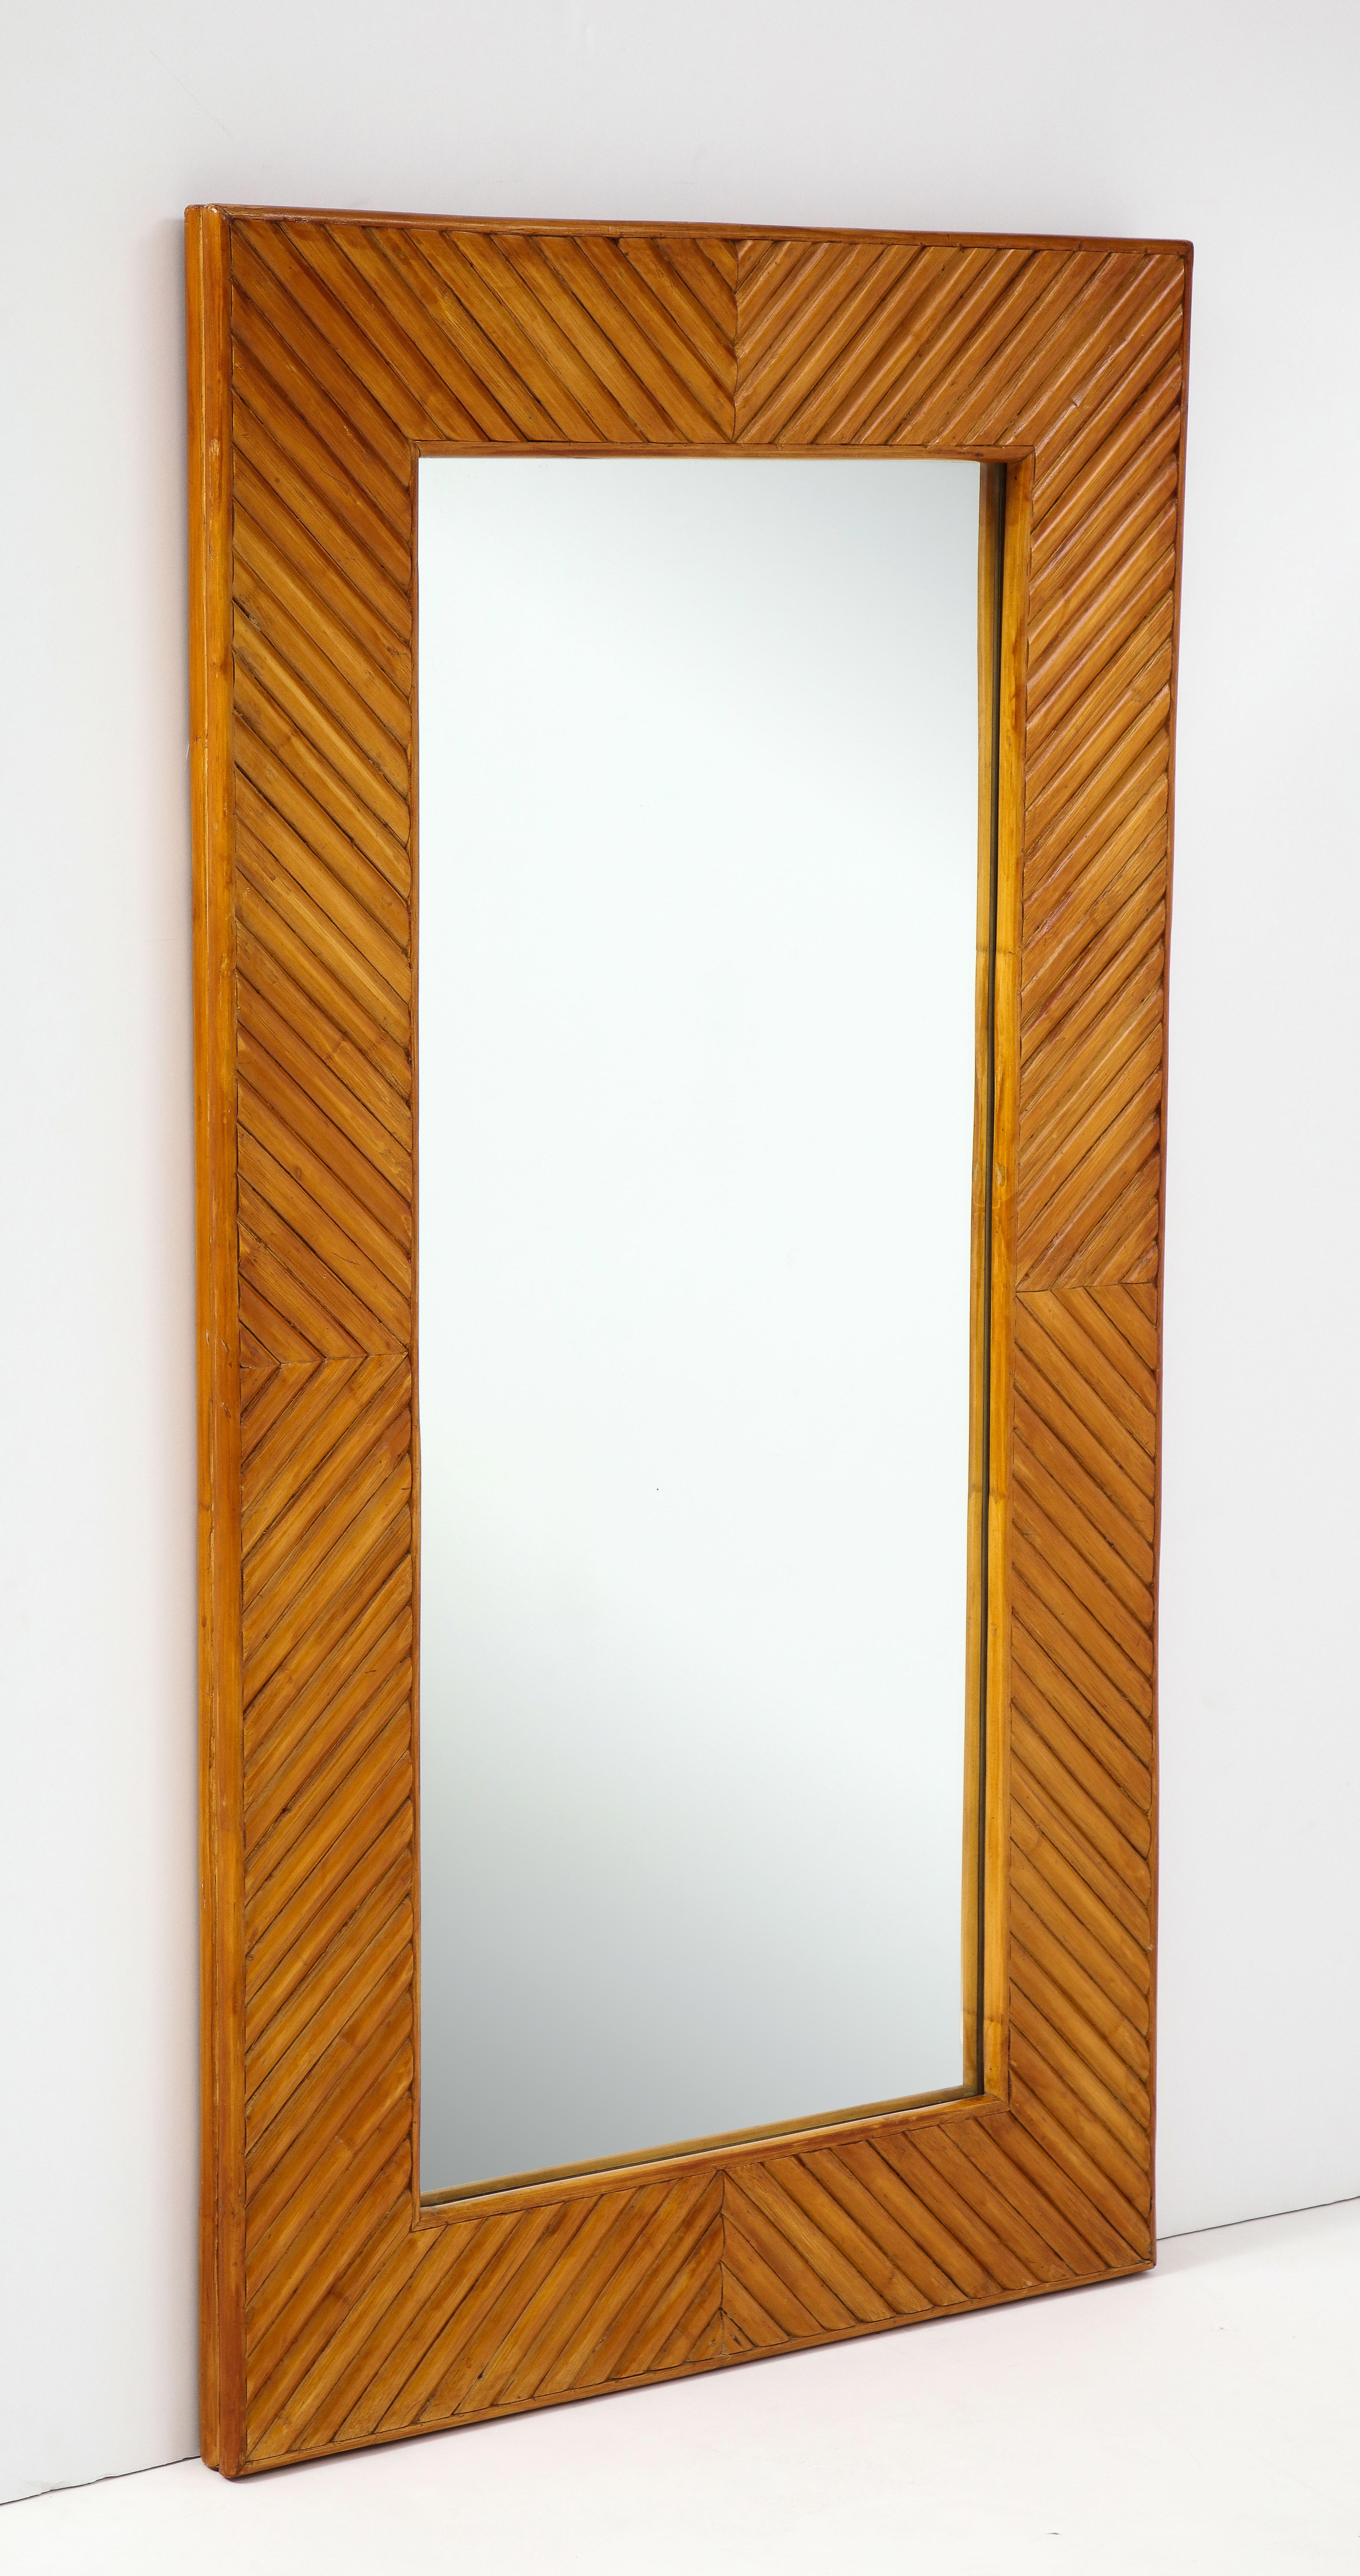 Vintage handcrafted rectangular bamboo mirror made with reed bamboo strips in a geometric design on the frame, Italy, 1970s. This stylish and chic mirror exudes 1970s glamour and is a unique handmade design. Restored with a new lacquer finish.